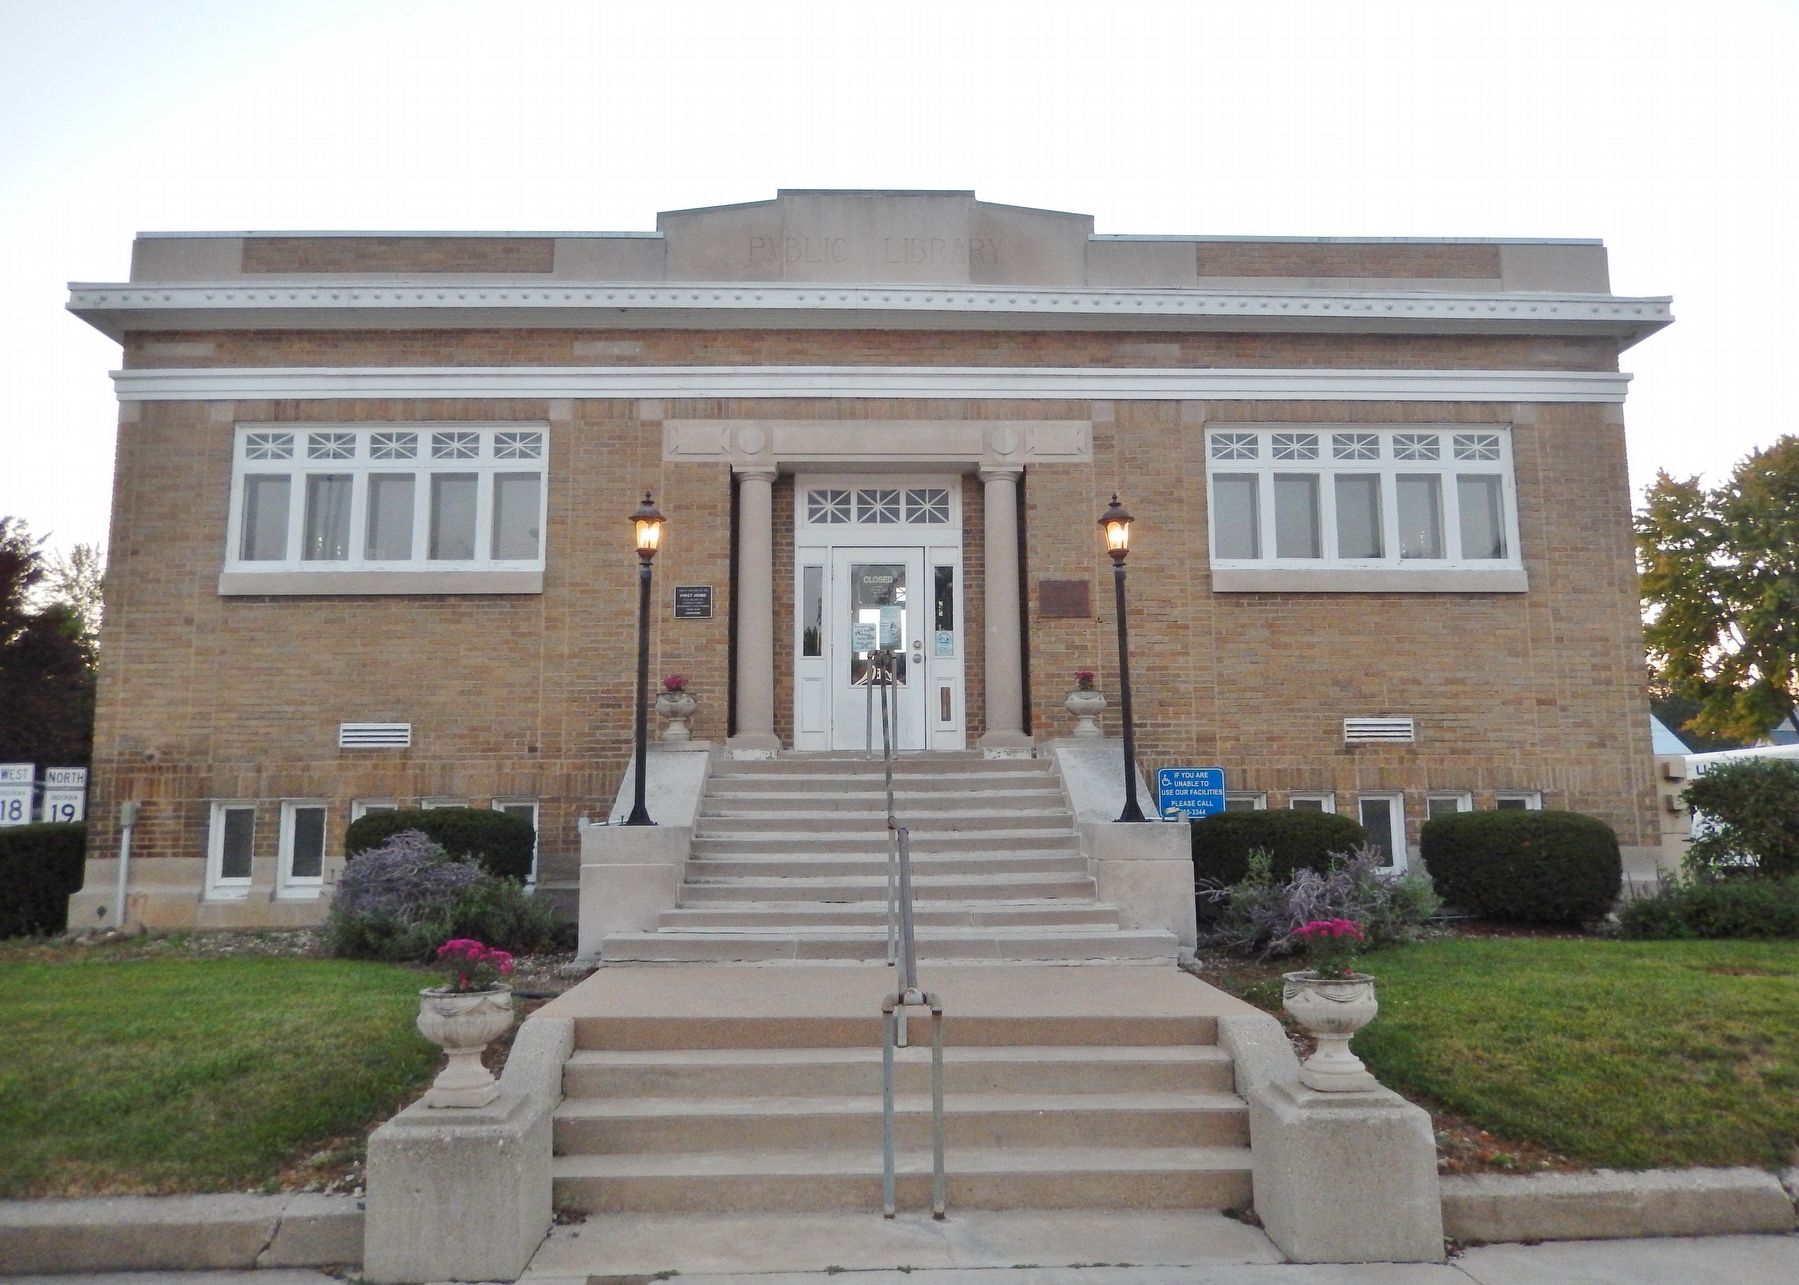 Converse-Jackson Township Public Library (<i>east/front elevation</i>) image. Click for full size.